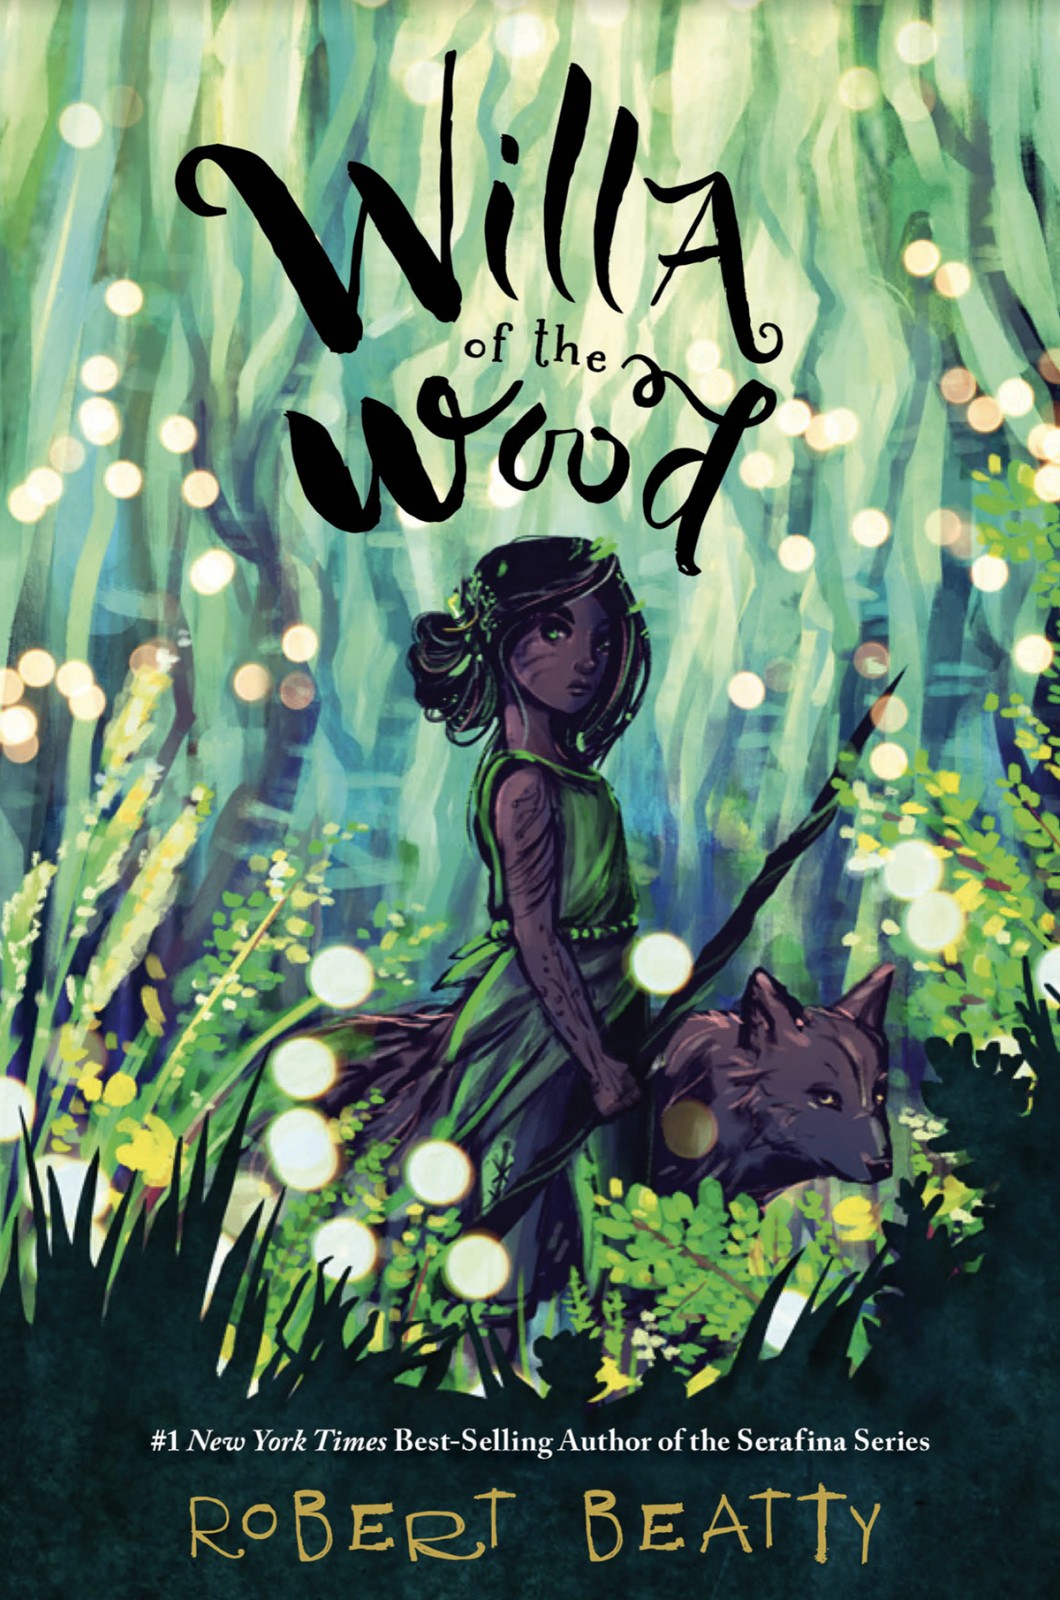 watched in the woods